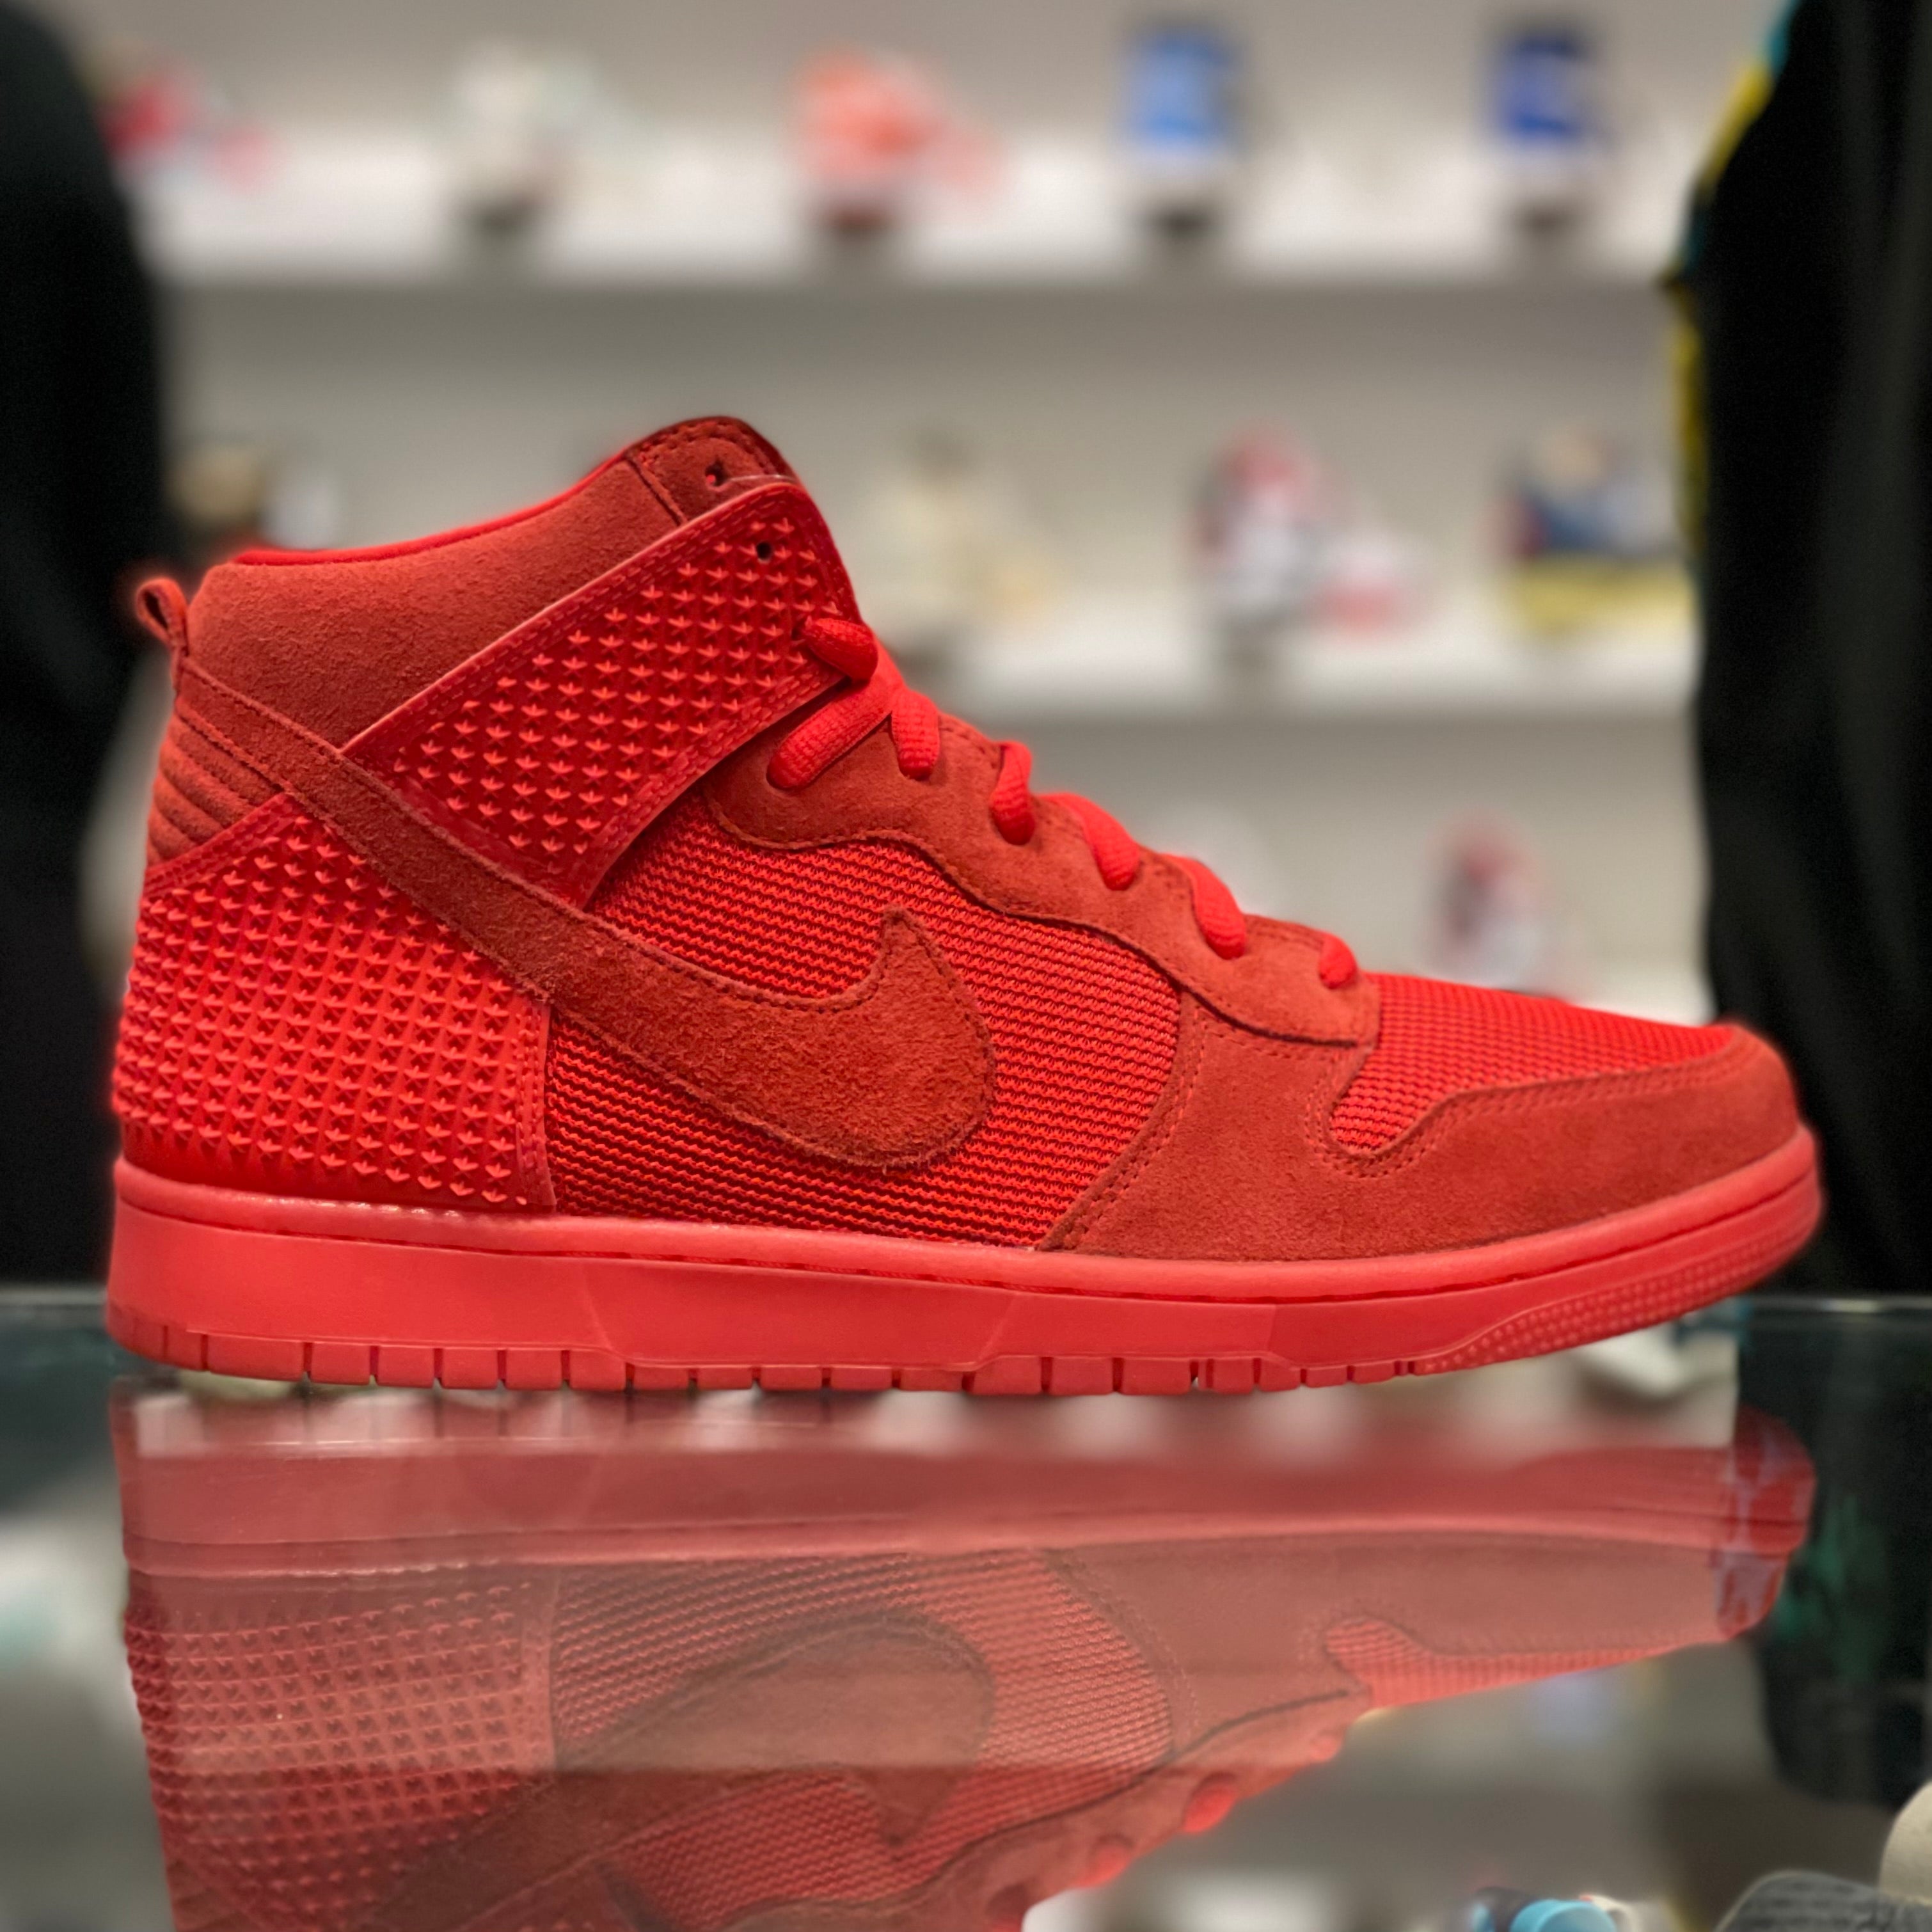 Nike Dunk High “Red October”